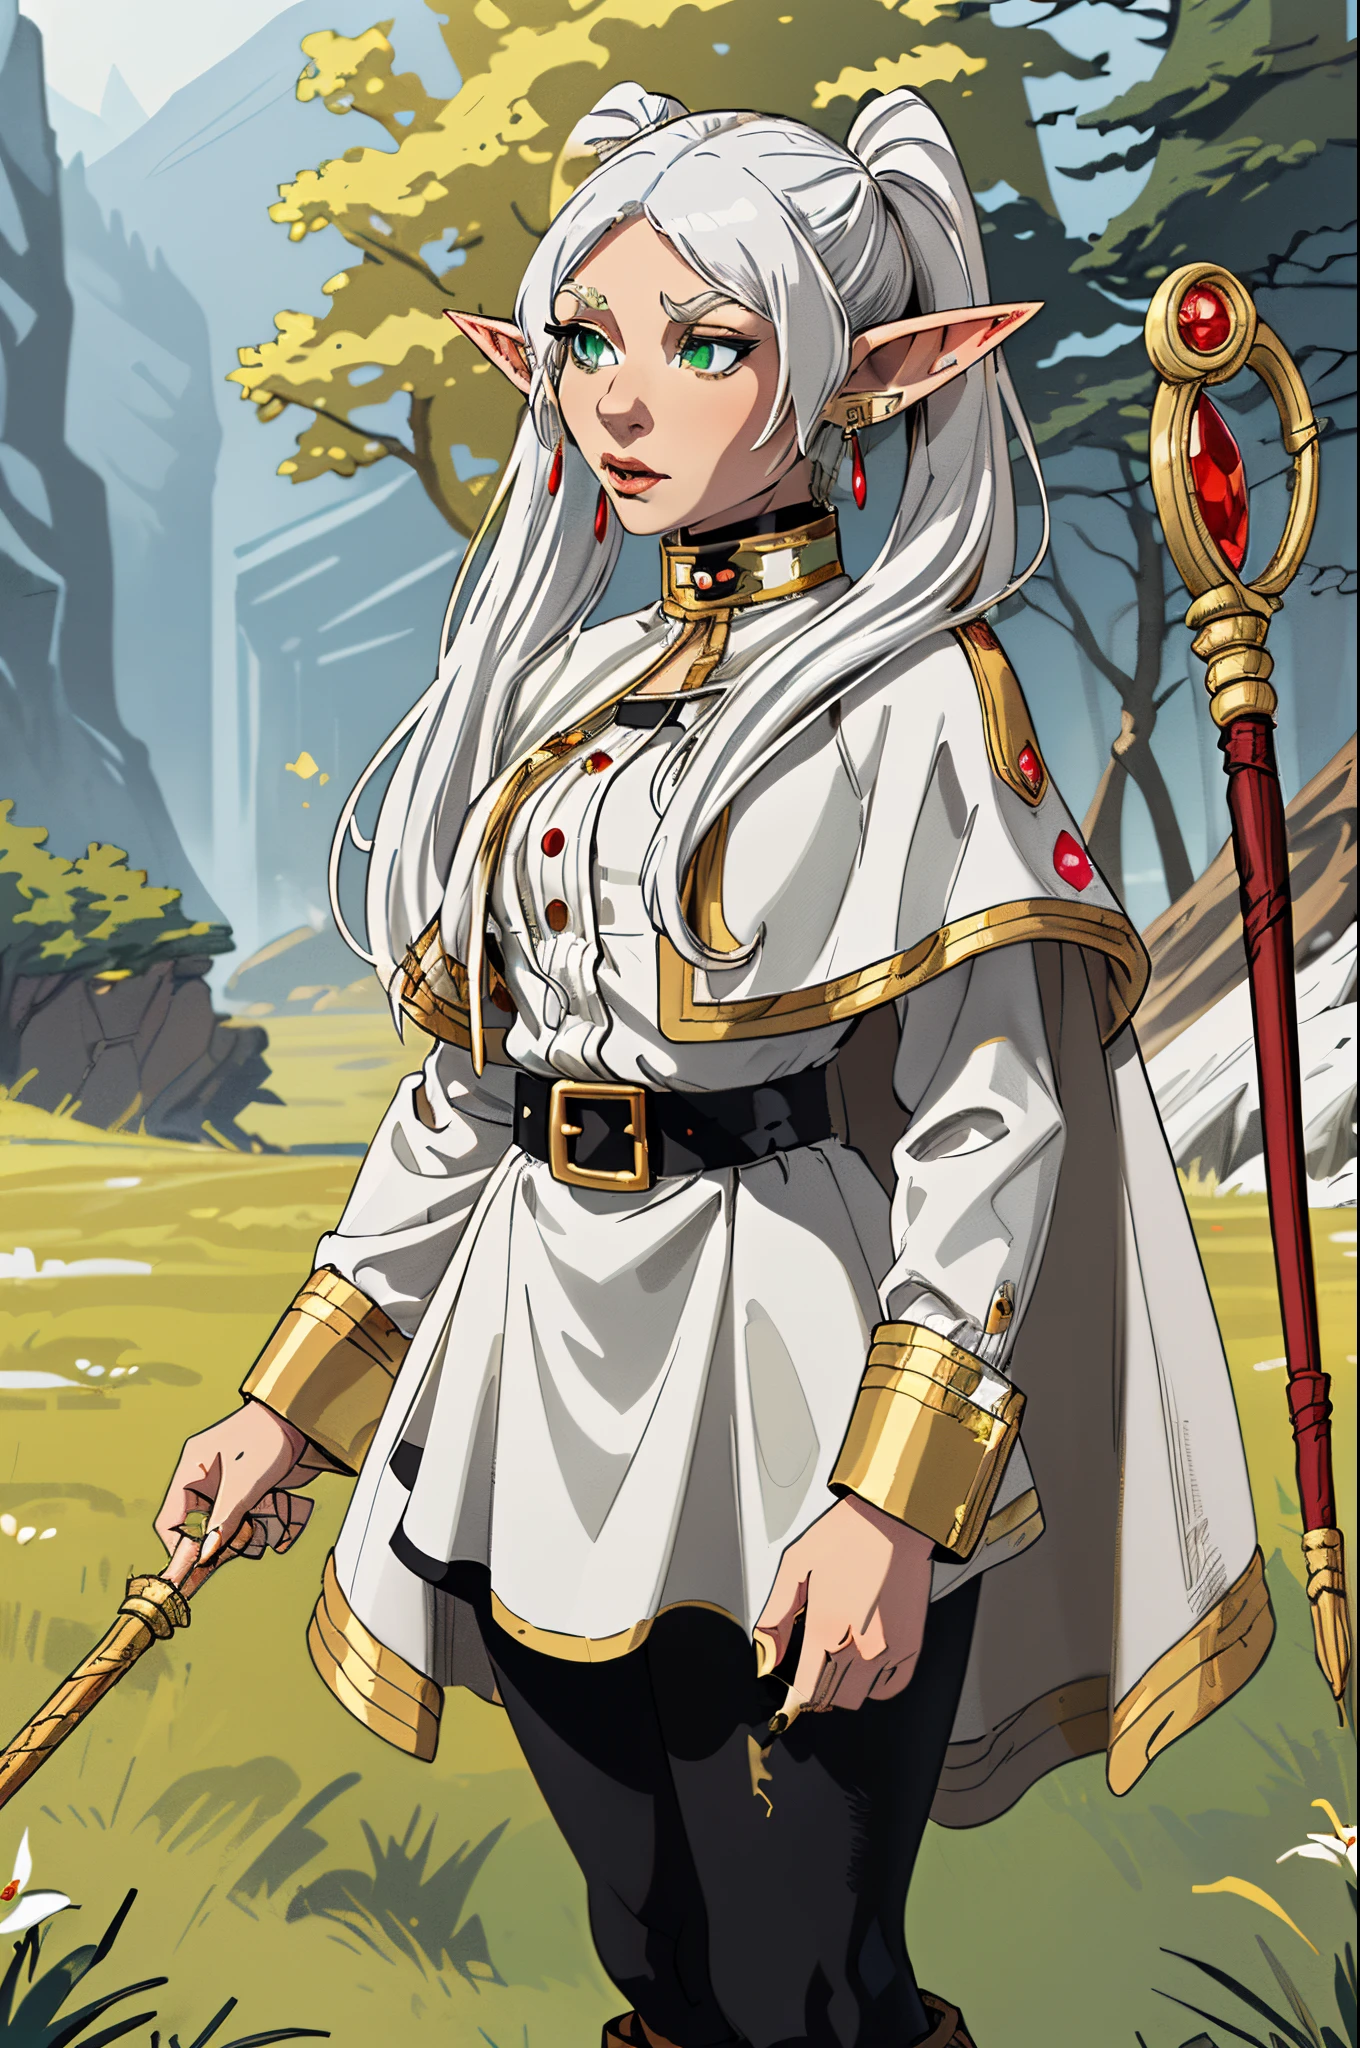 masterpiece, best quality,( Frieren: Beyond Journey’s End
) , (( a , female Elf with green eyes and long white hair tied into two pigtails. Like all Elves, she has large, pointed ears.

She wears a striped black and white shirt, along with a white jacket with gold embellishments tucked into a matching skirt with a black belt. Over her jacket, she wears a short white and gold cape with a high collar. She also wears black tights and brown boots, and a pair of gold and red earrings.)) perfect anatomy, FrierenBase, twintails, earrings, white capelet, striped shirt, white skirt, long sleeves, belt, black pantyhose, staff, holding staff, outdoors, forest,